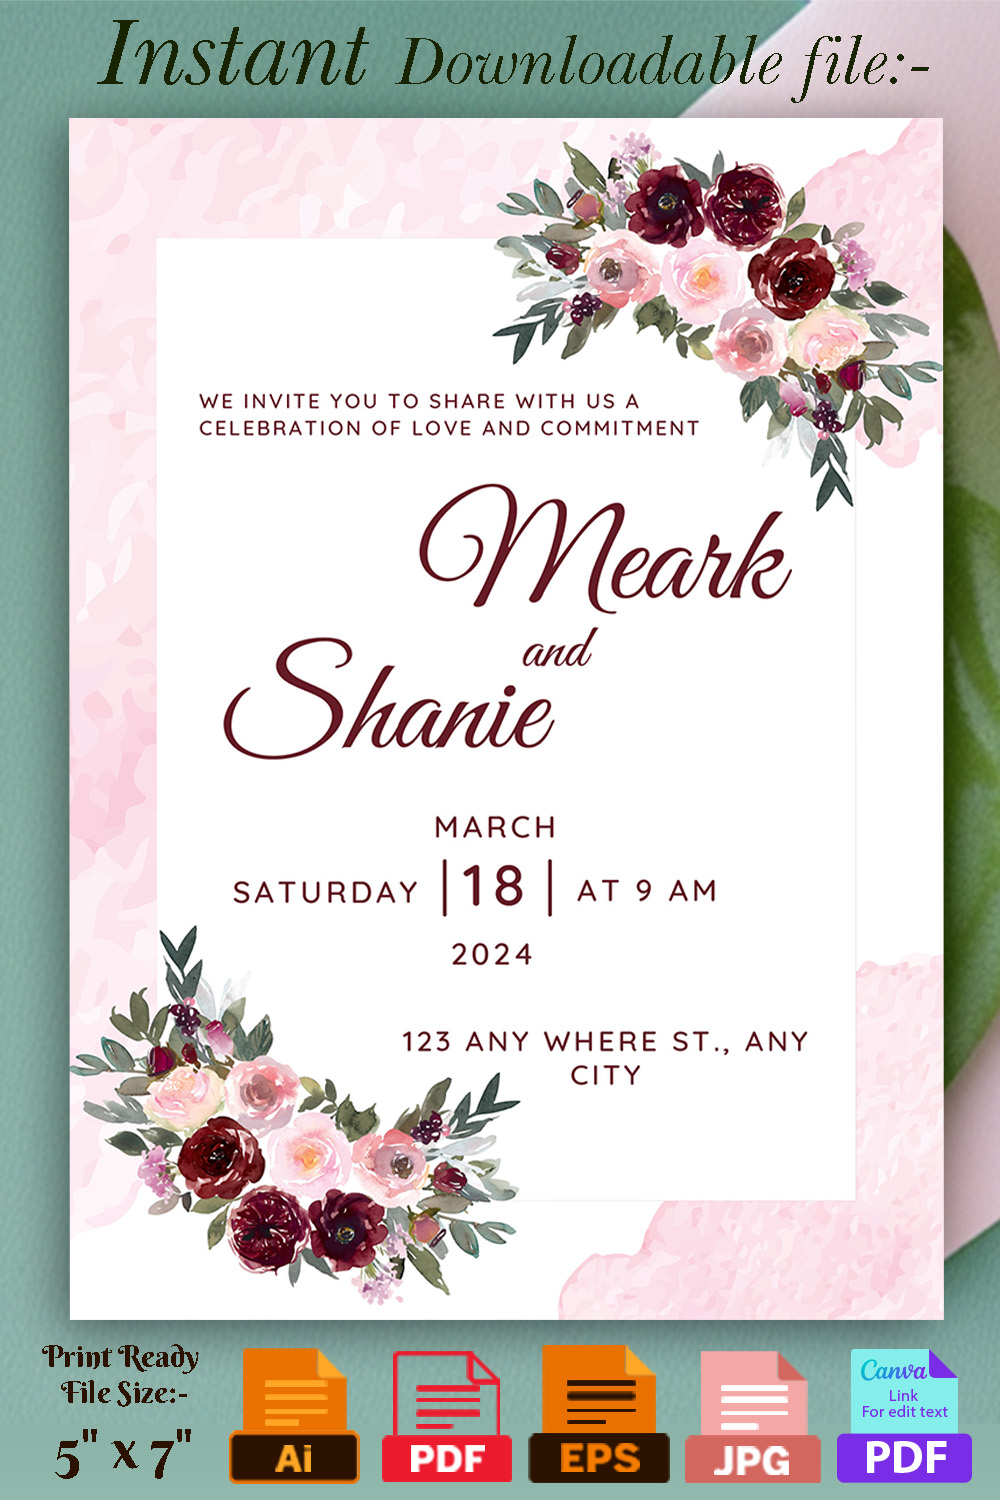 Image with amazing wedding invitation in pink tone and flowers.